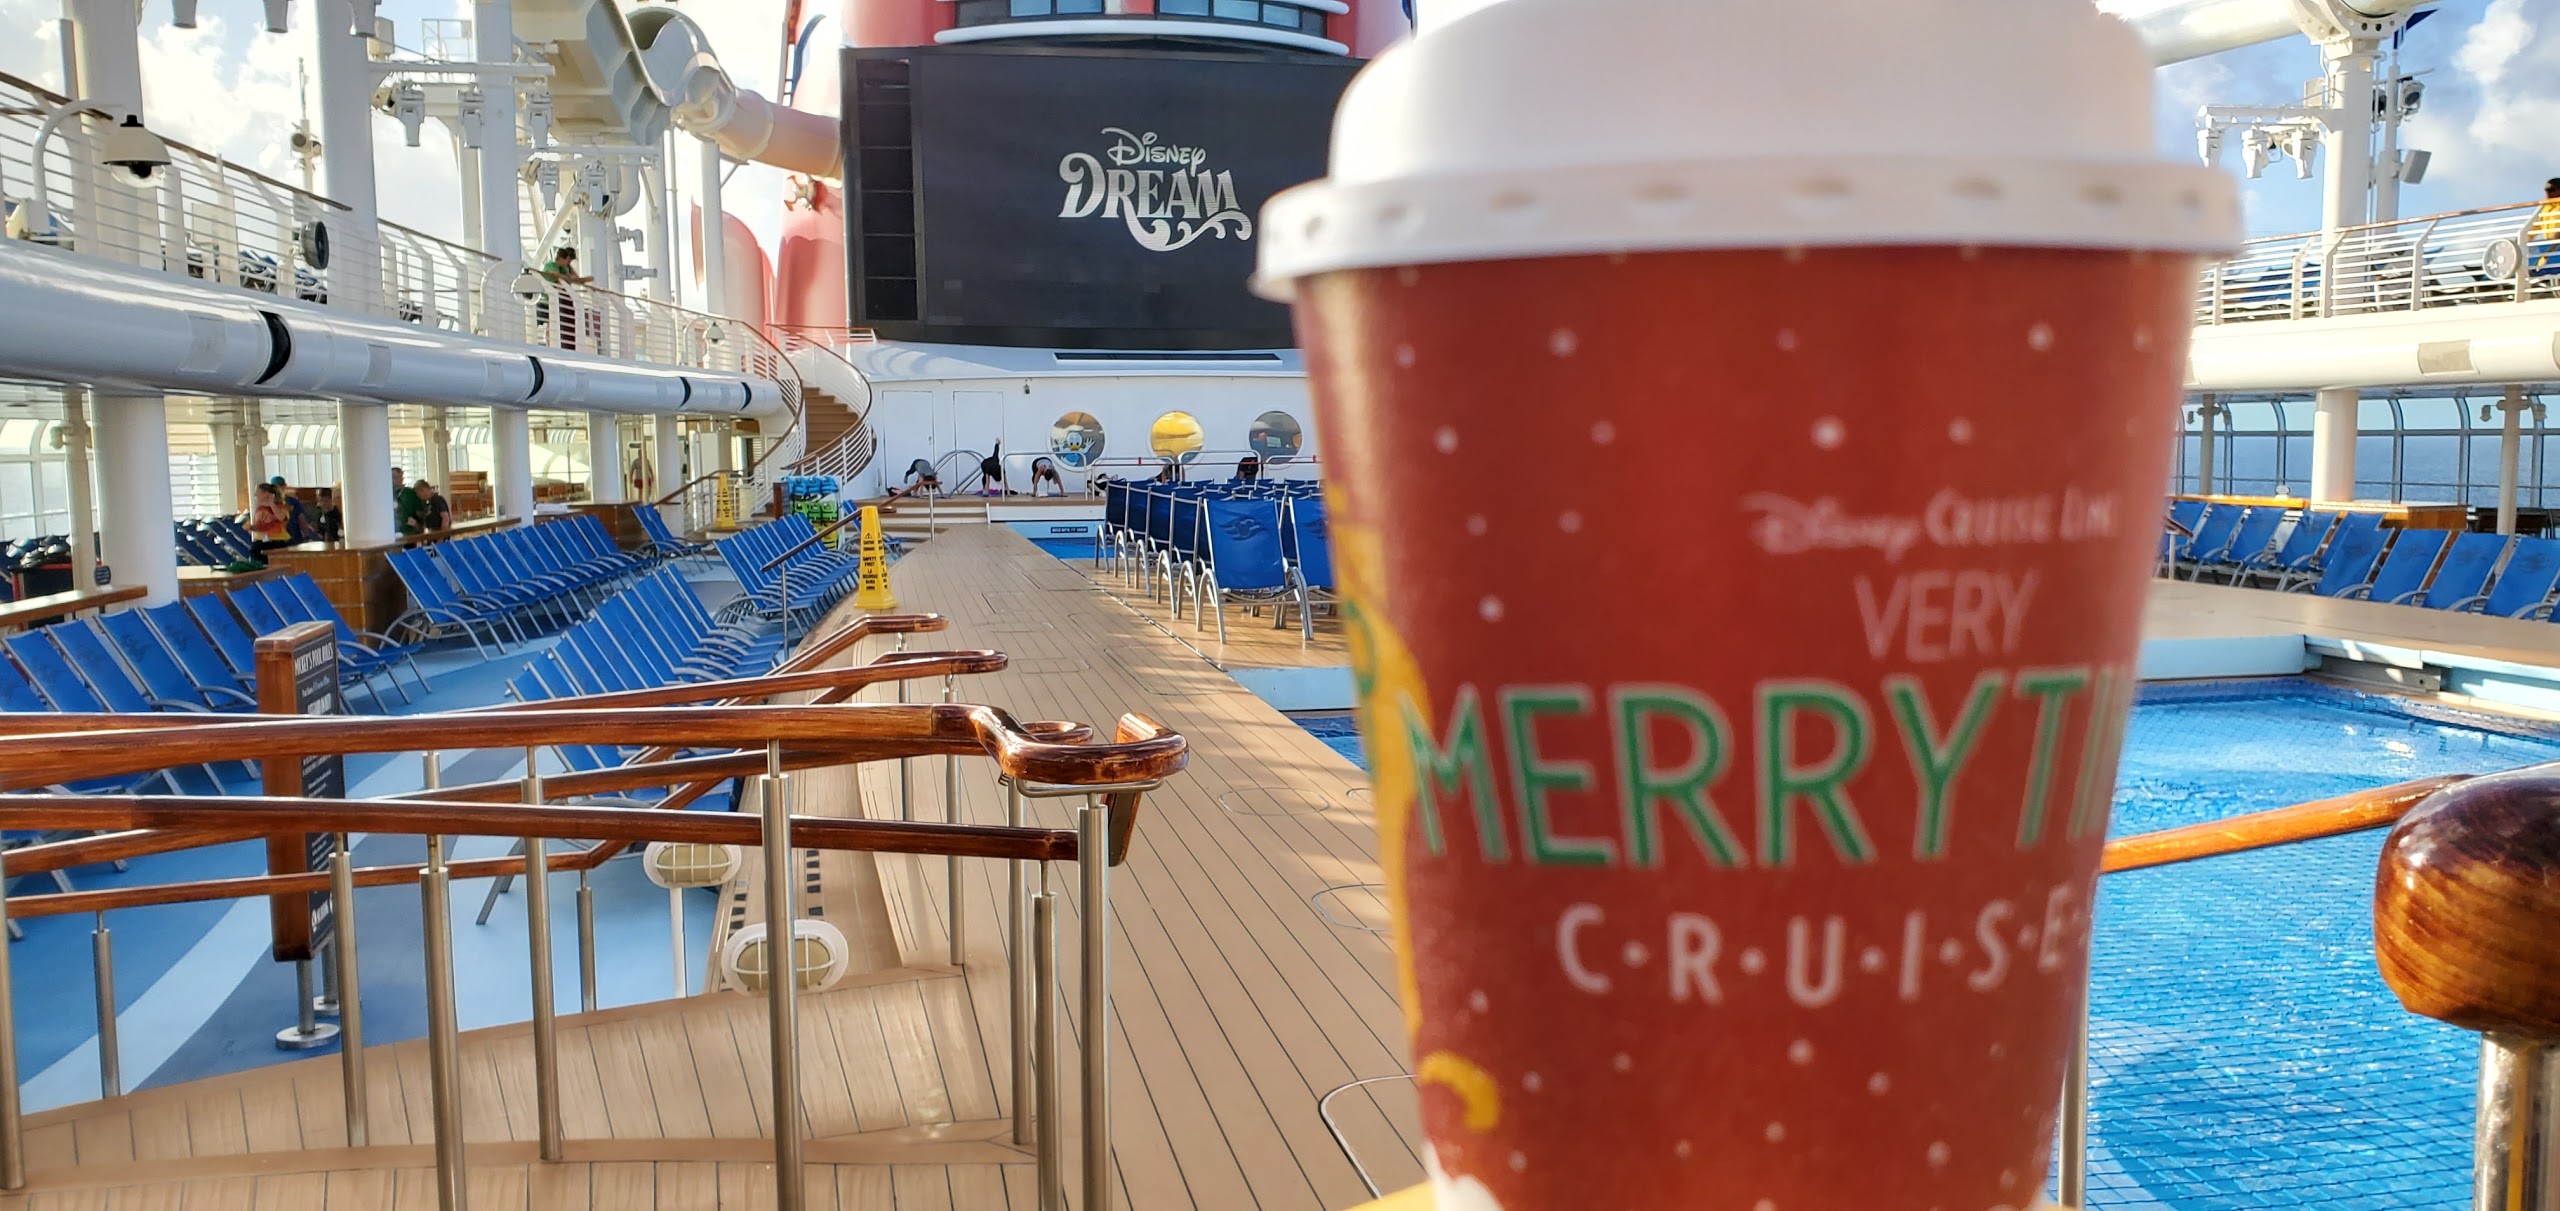 Disney’s Very Merrytime Cruise is the Perfect Way to Celebrate the Holidays